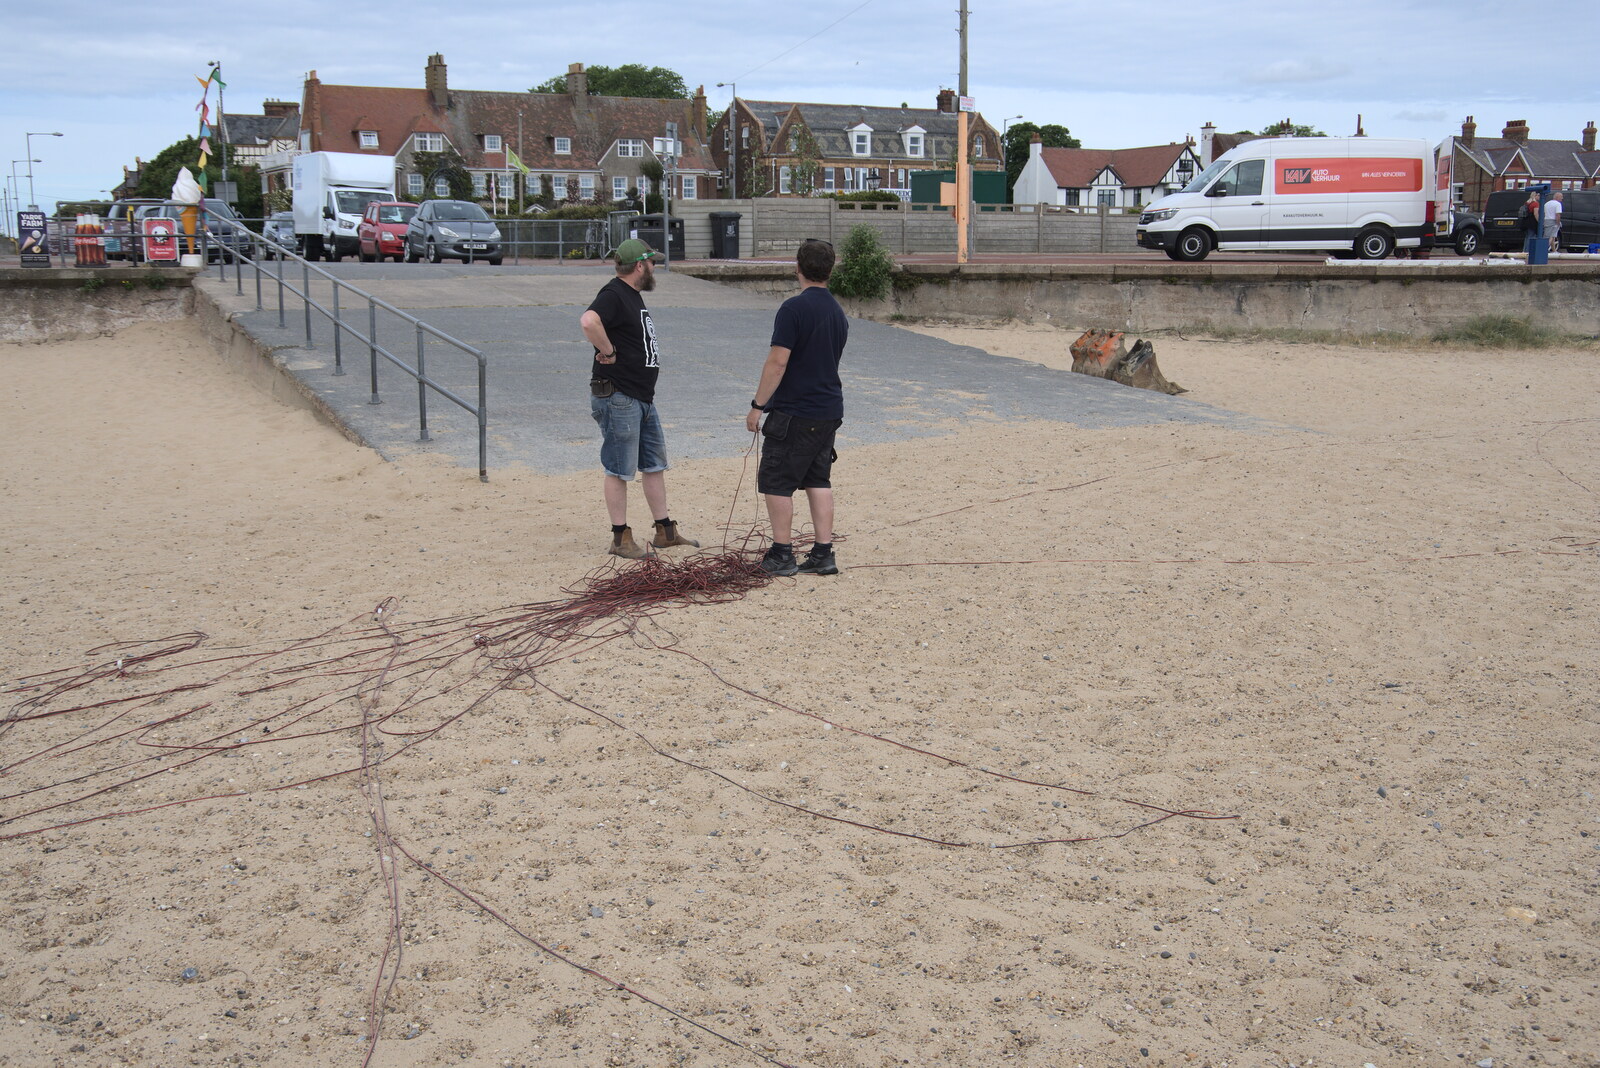 The Signal dudes retrieve miles of cable from Faded Seaside Glamour: A Weekend in Great Yarmouth, Norfolk - 29th May 2022